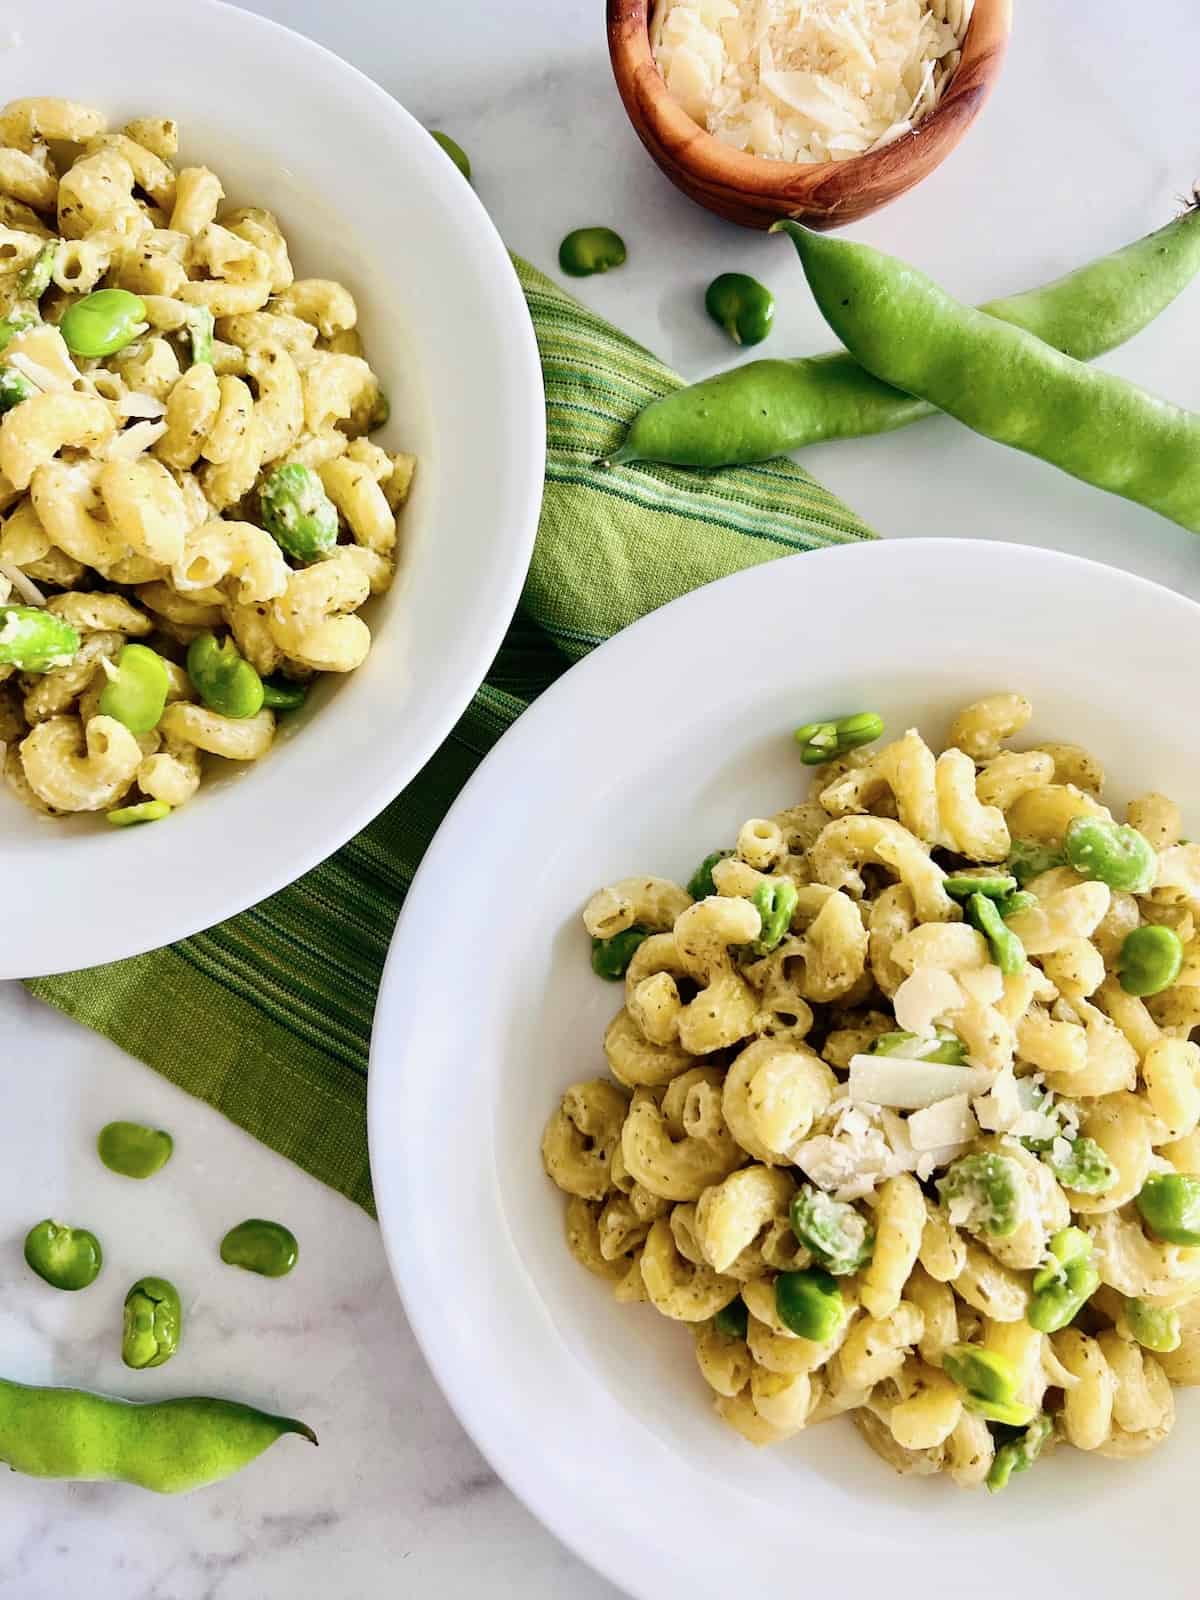 Creamy Pesto Pasta with Fava Beans Two pasta bowls filled with shaved parmesan on top and fava beans with green napkin.